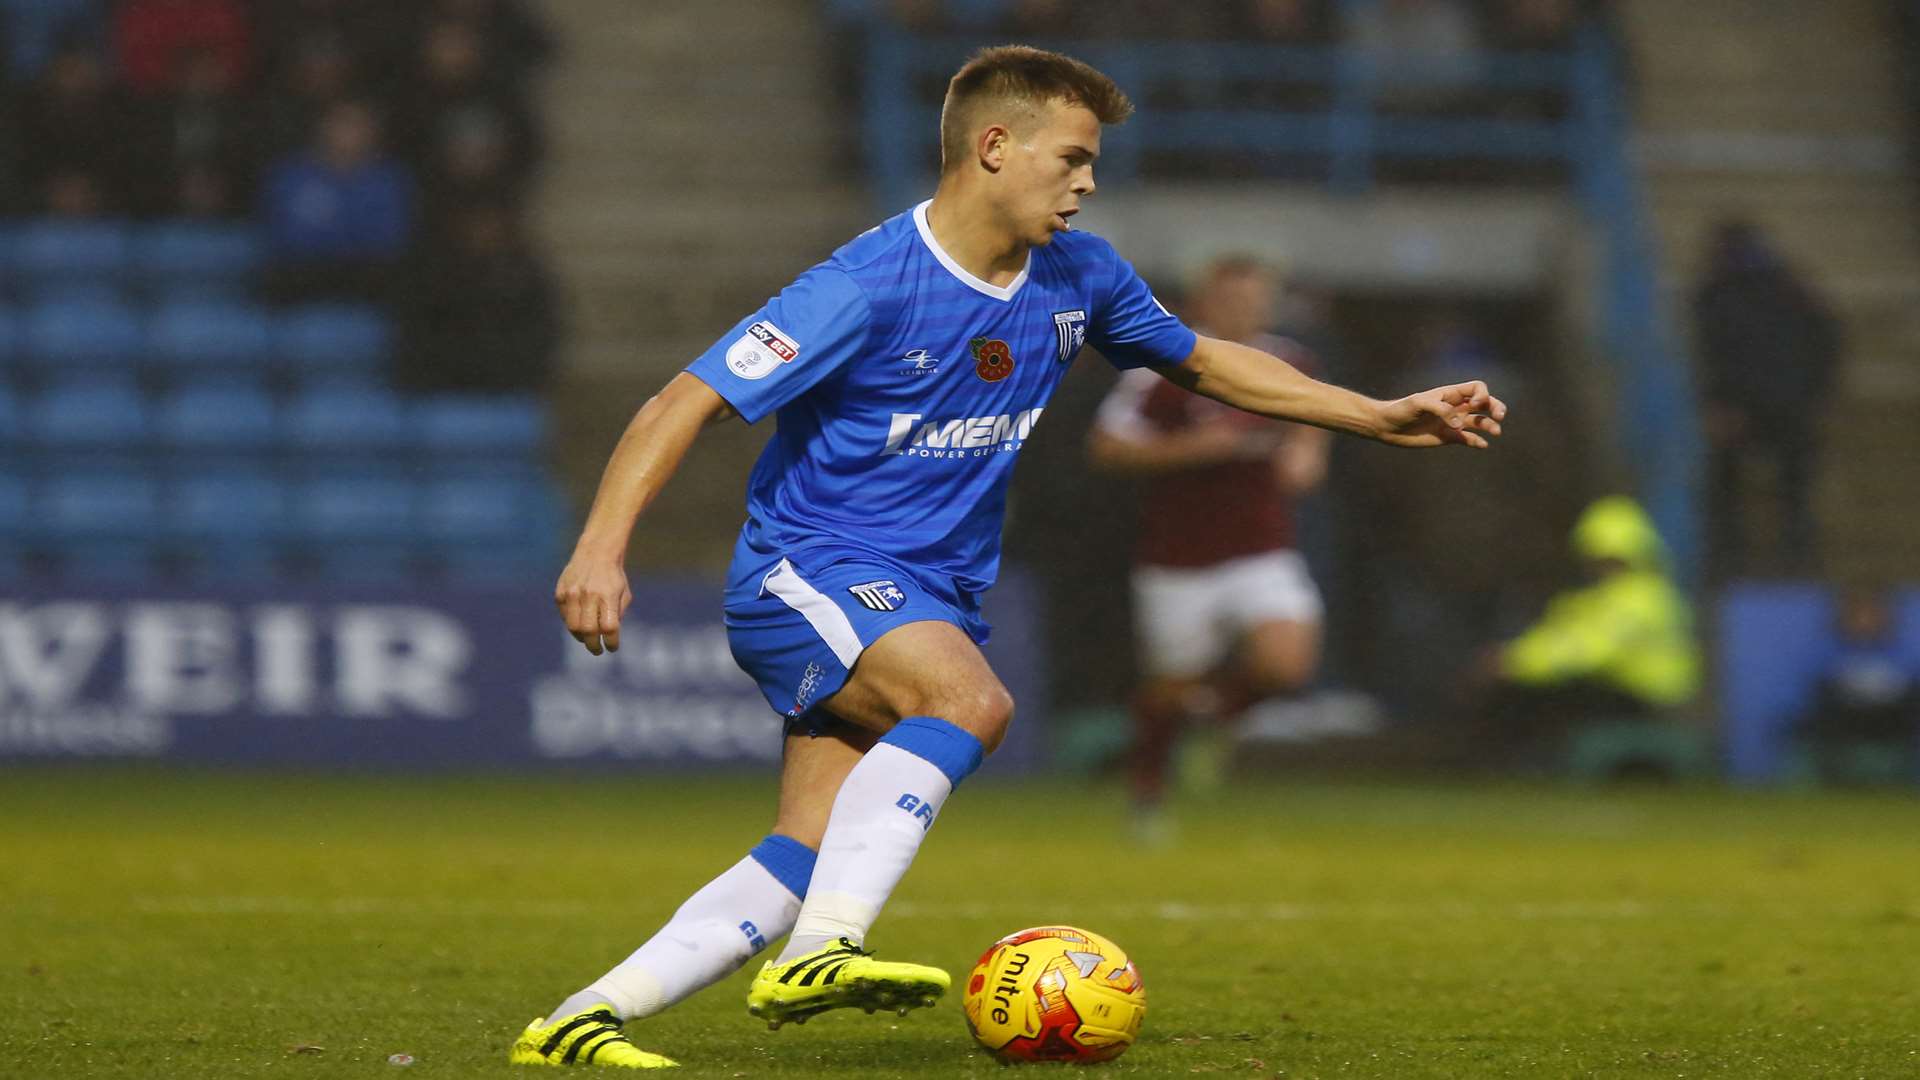 Jake Hessenthaler with time on the ball Picture: Andy Jones